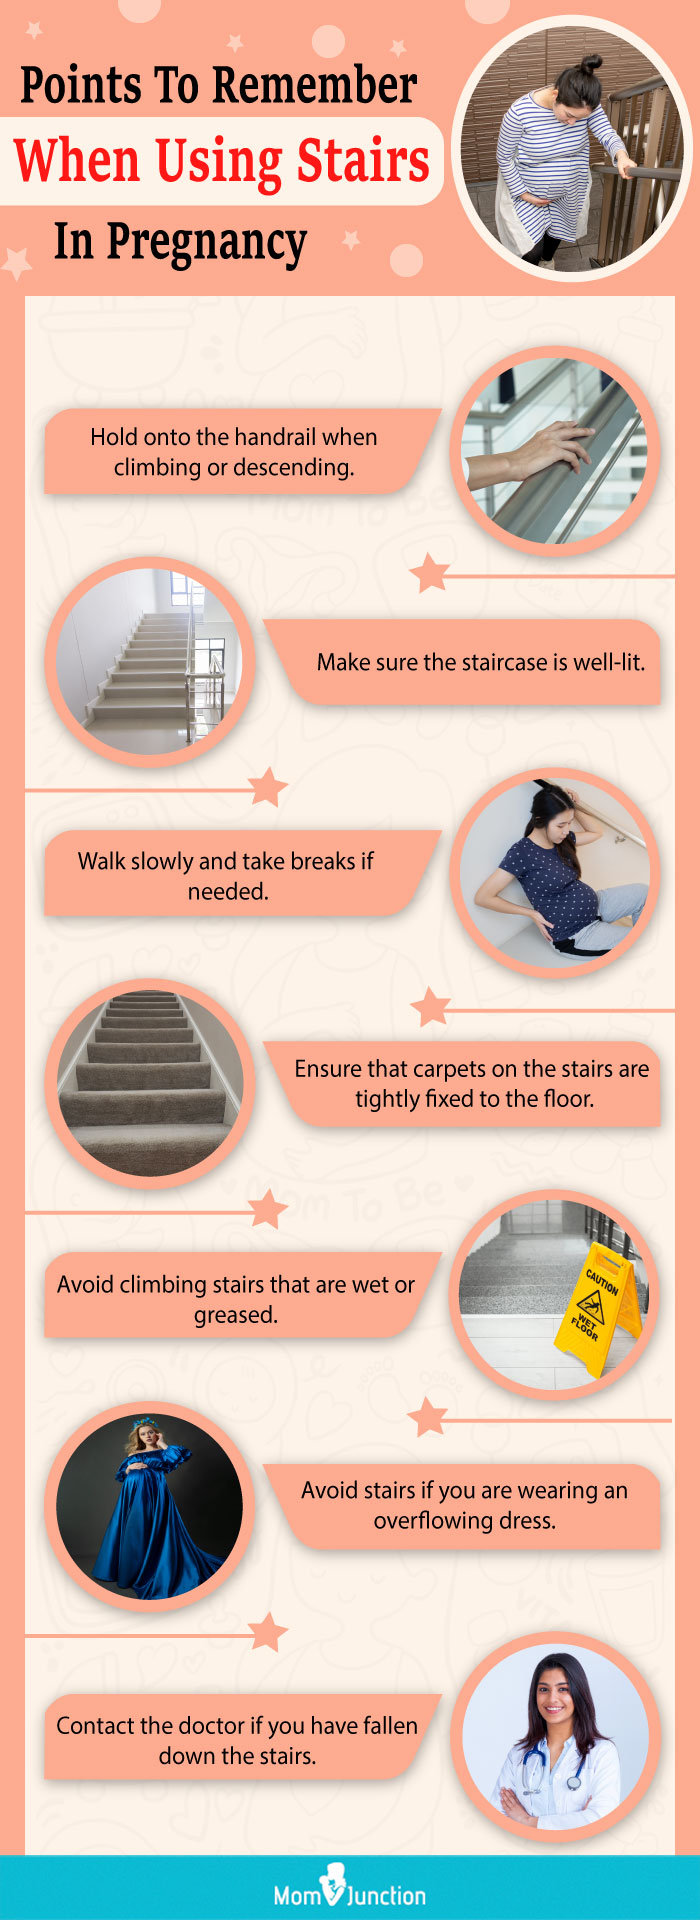 points to remember using stairs in pregnancy (infographic)